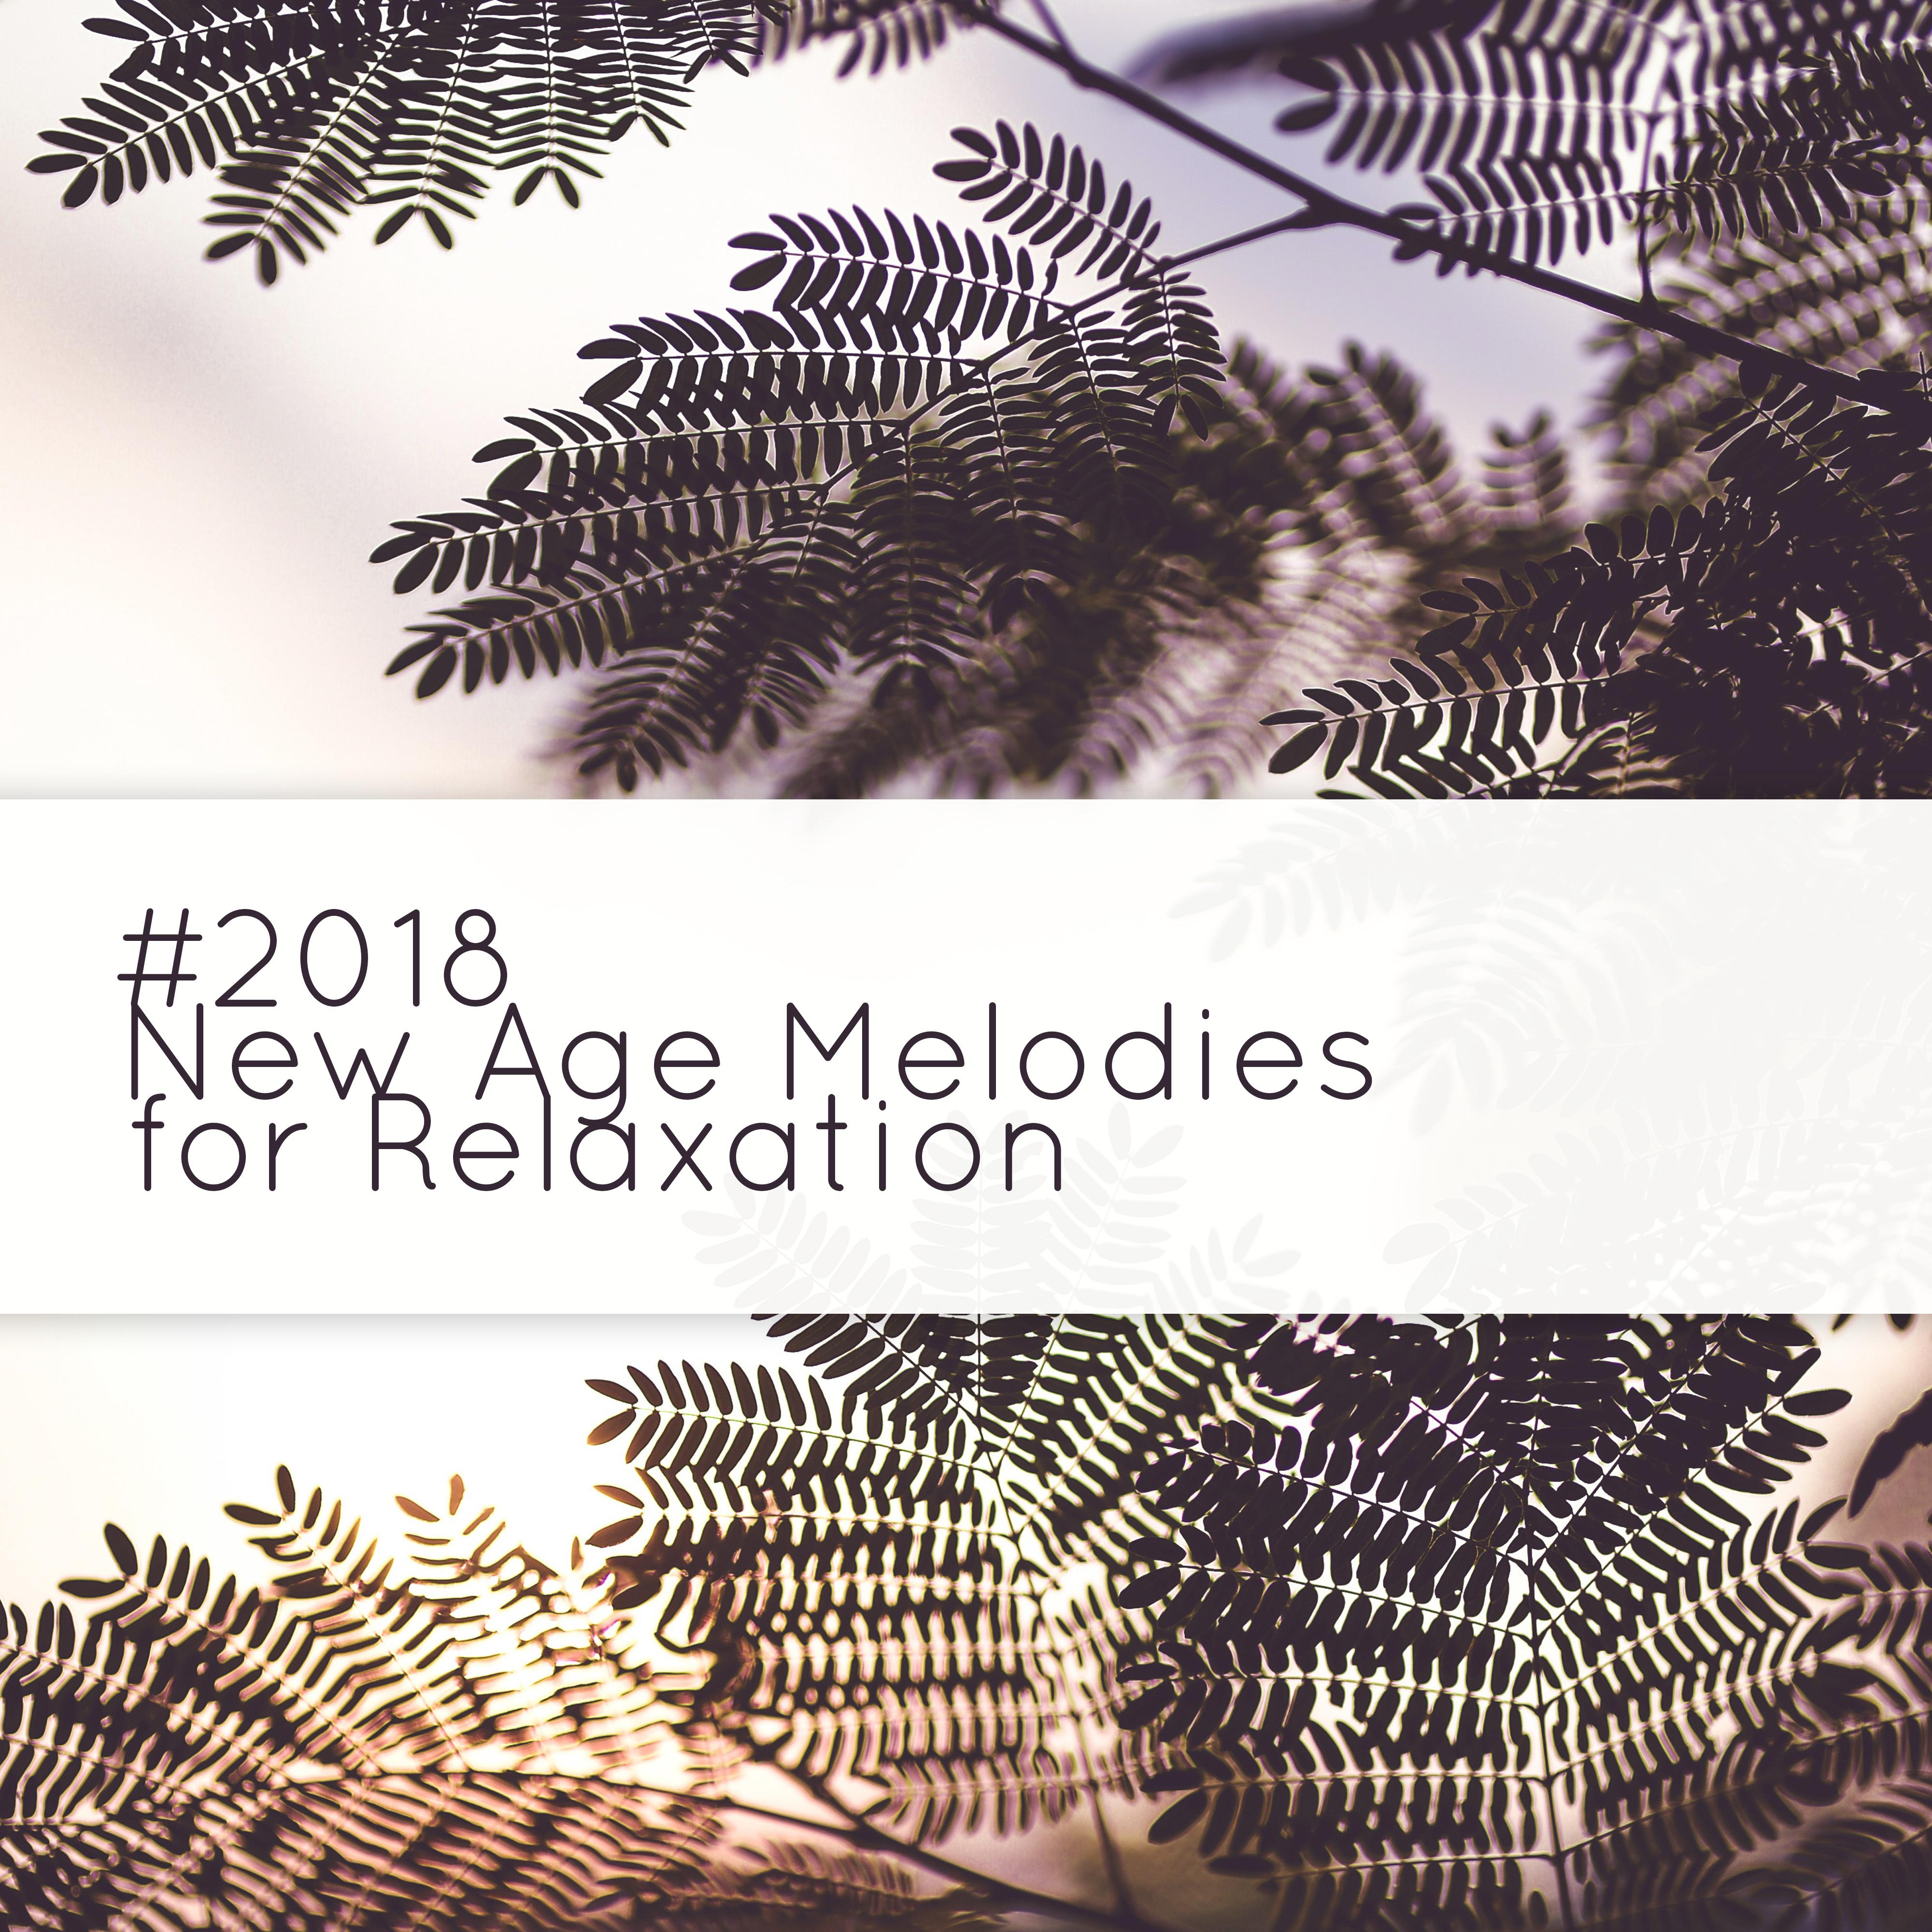 #2018 New Age Melodies for Relaxation